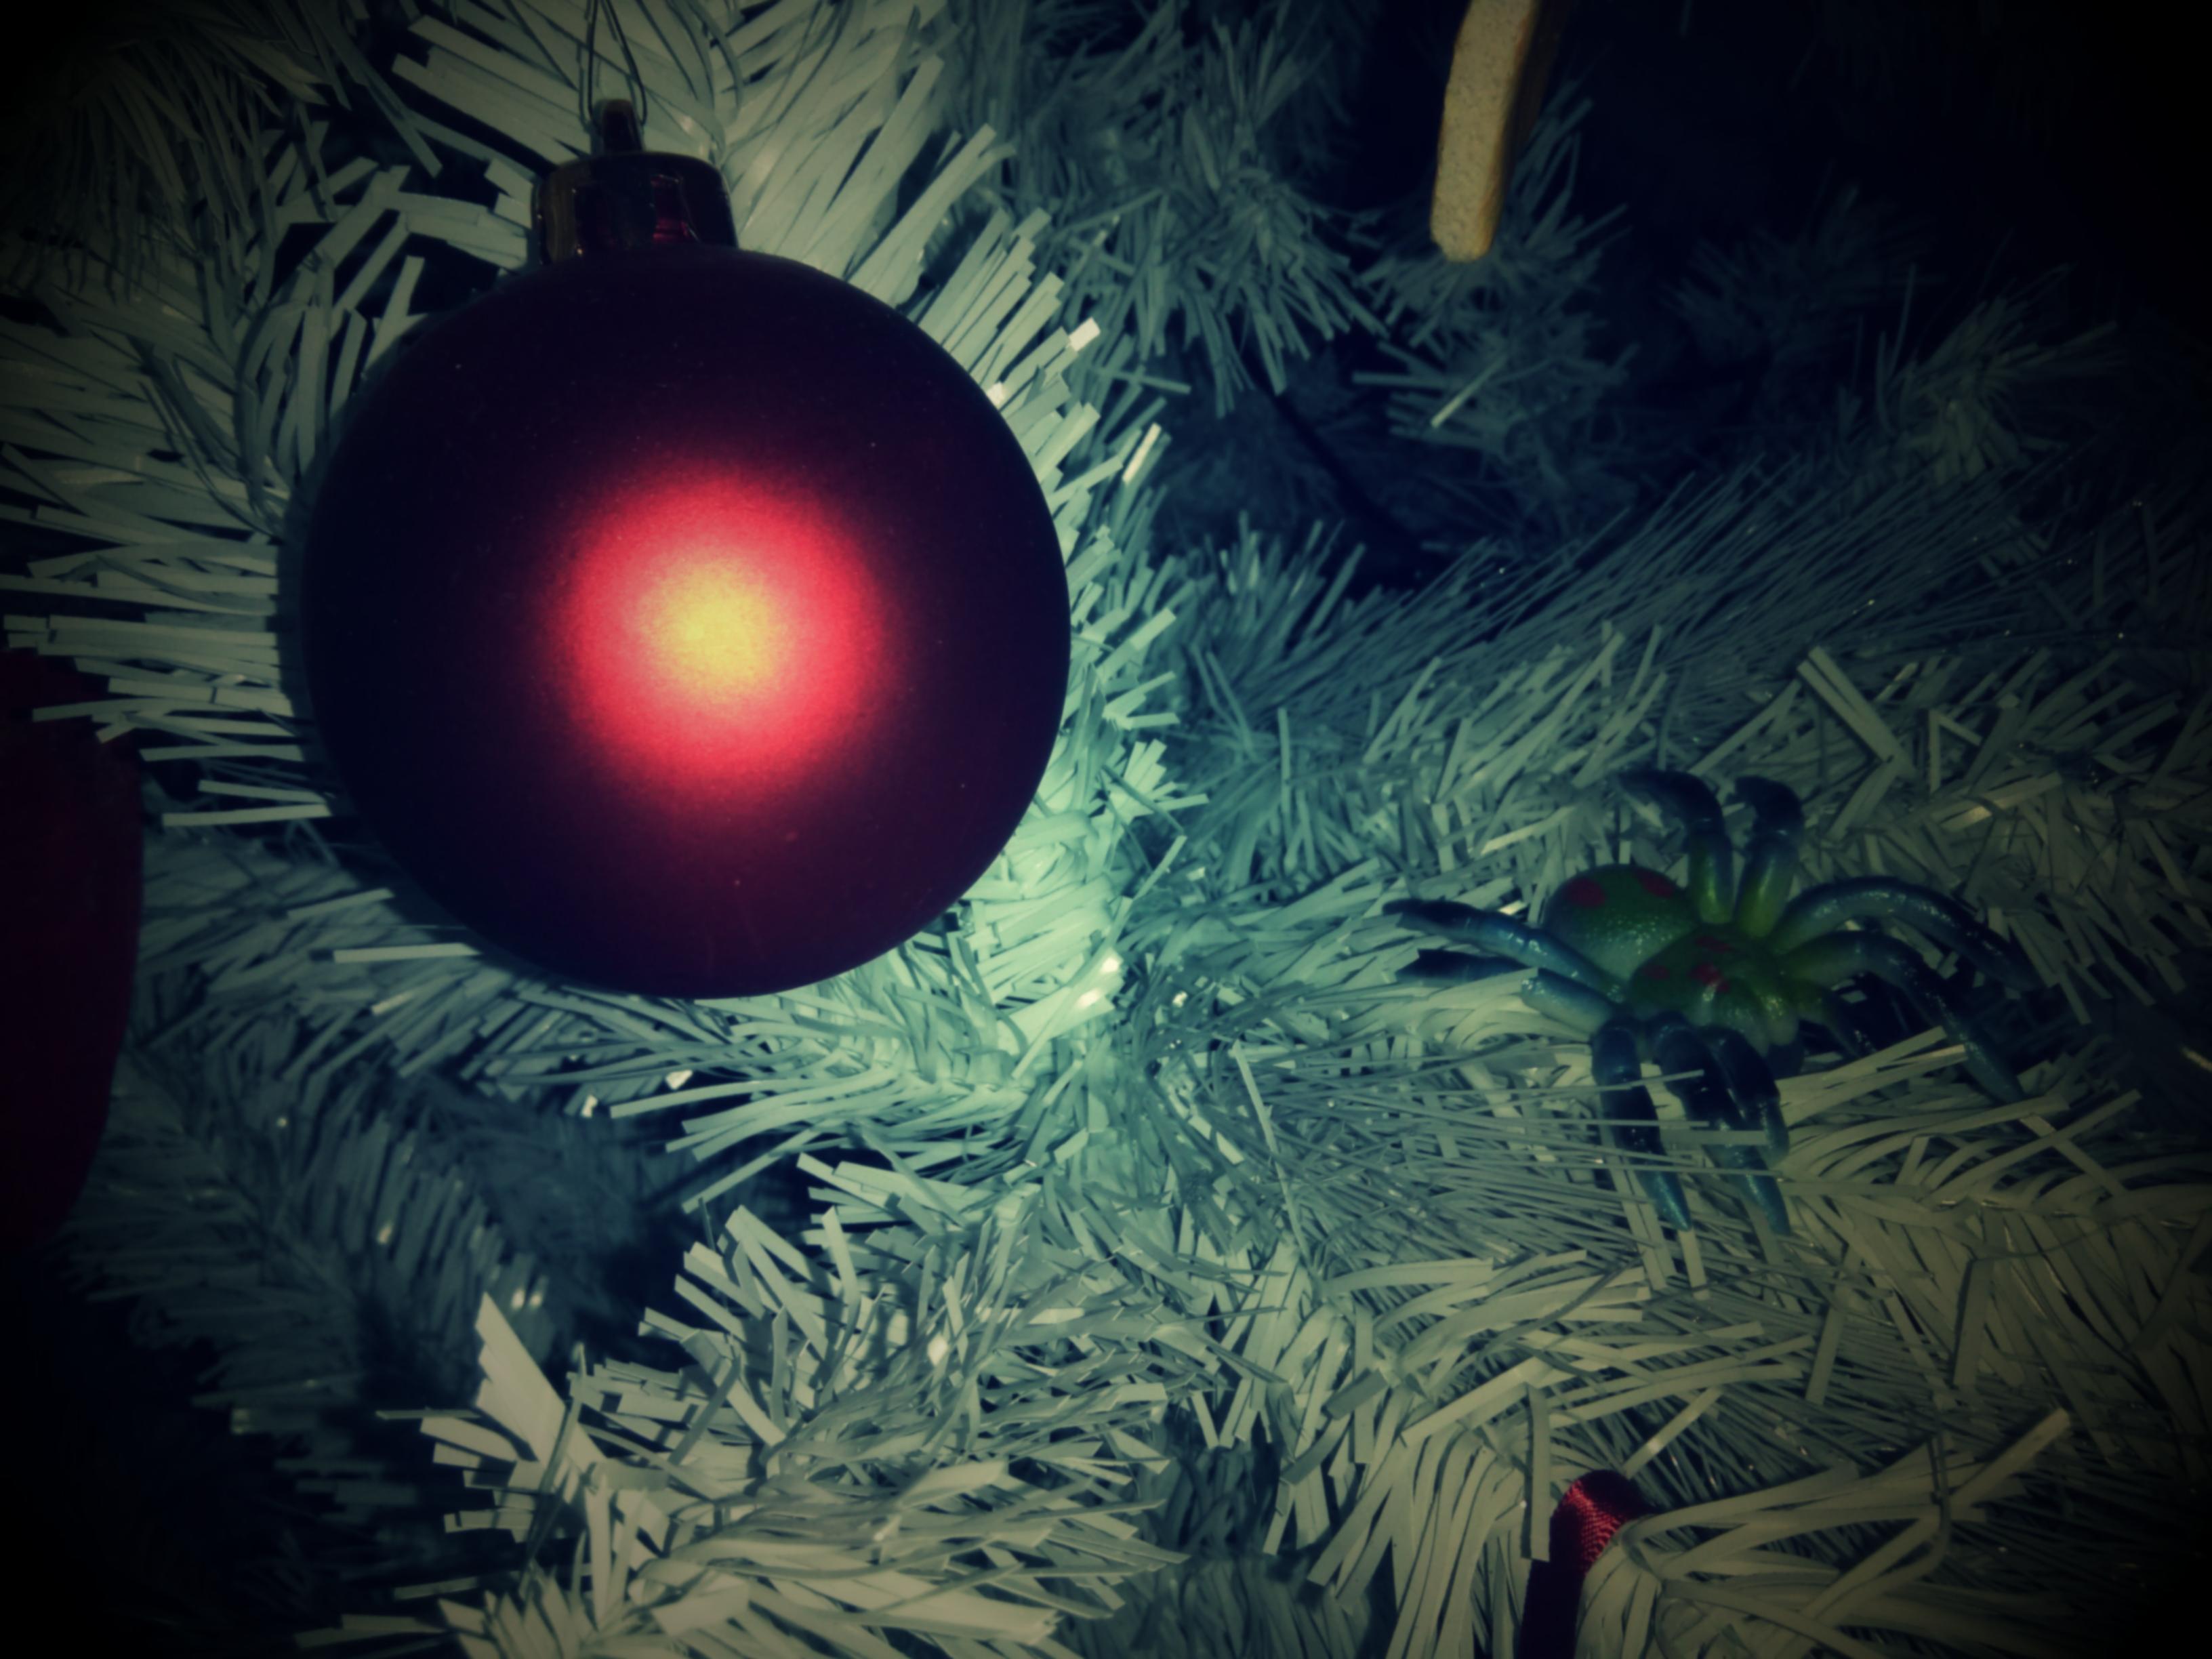 Spider in a Christmas tree (186/365)